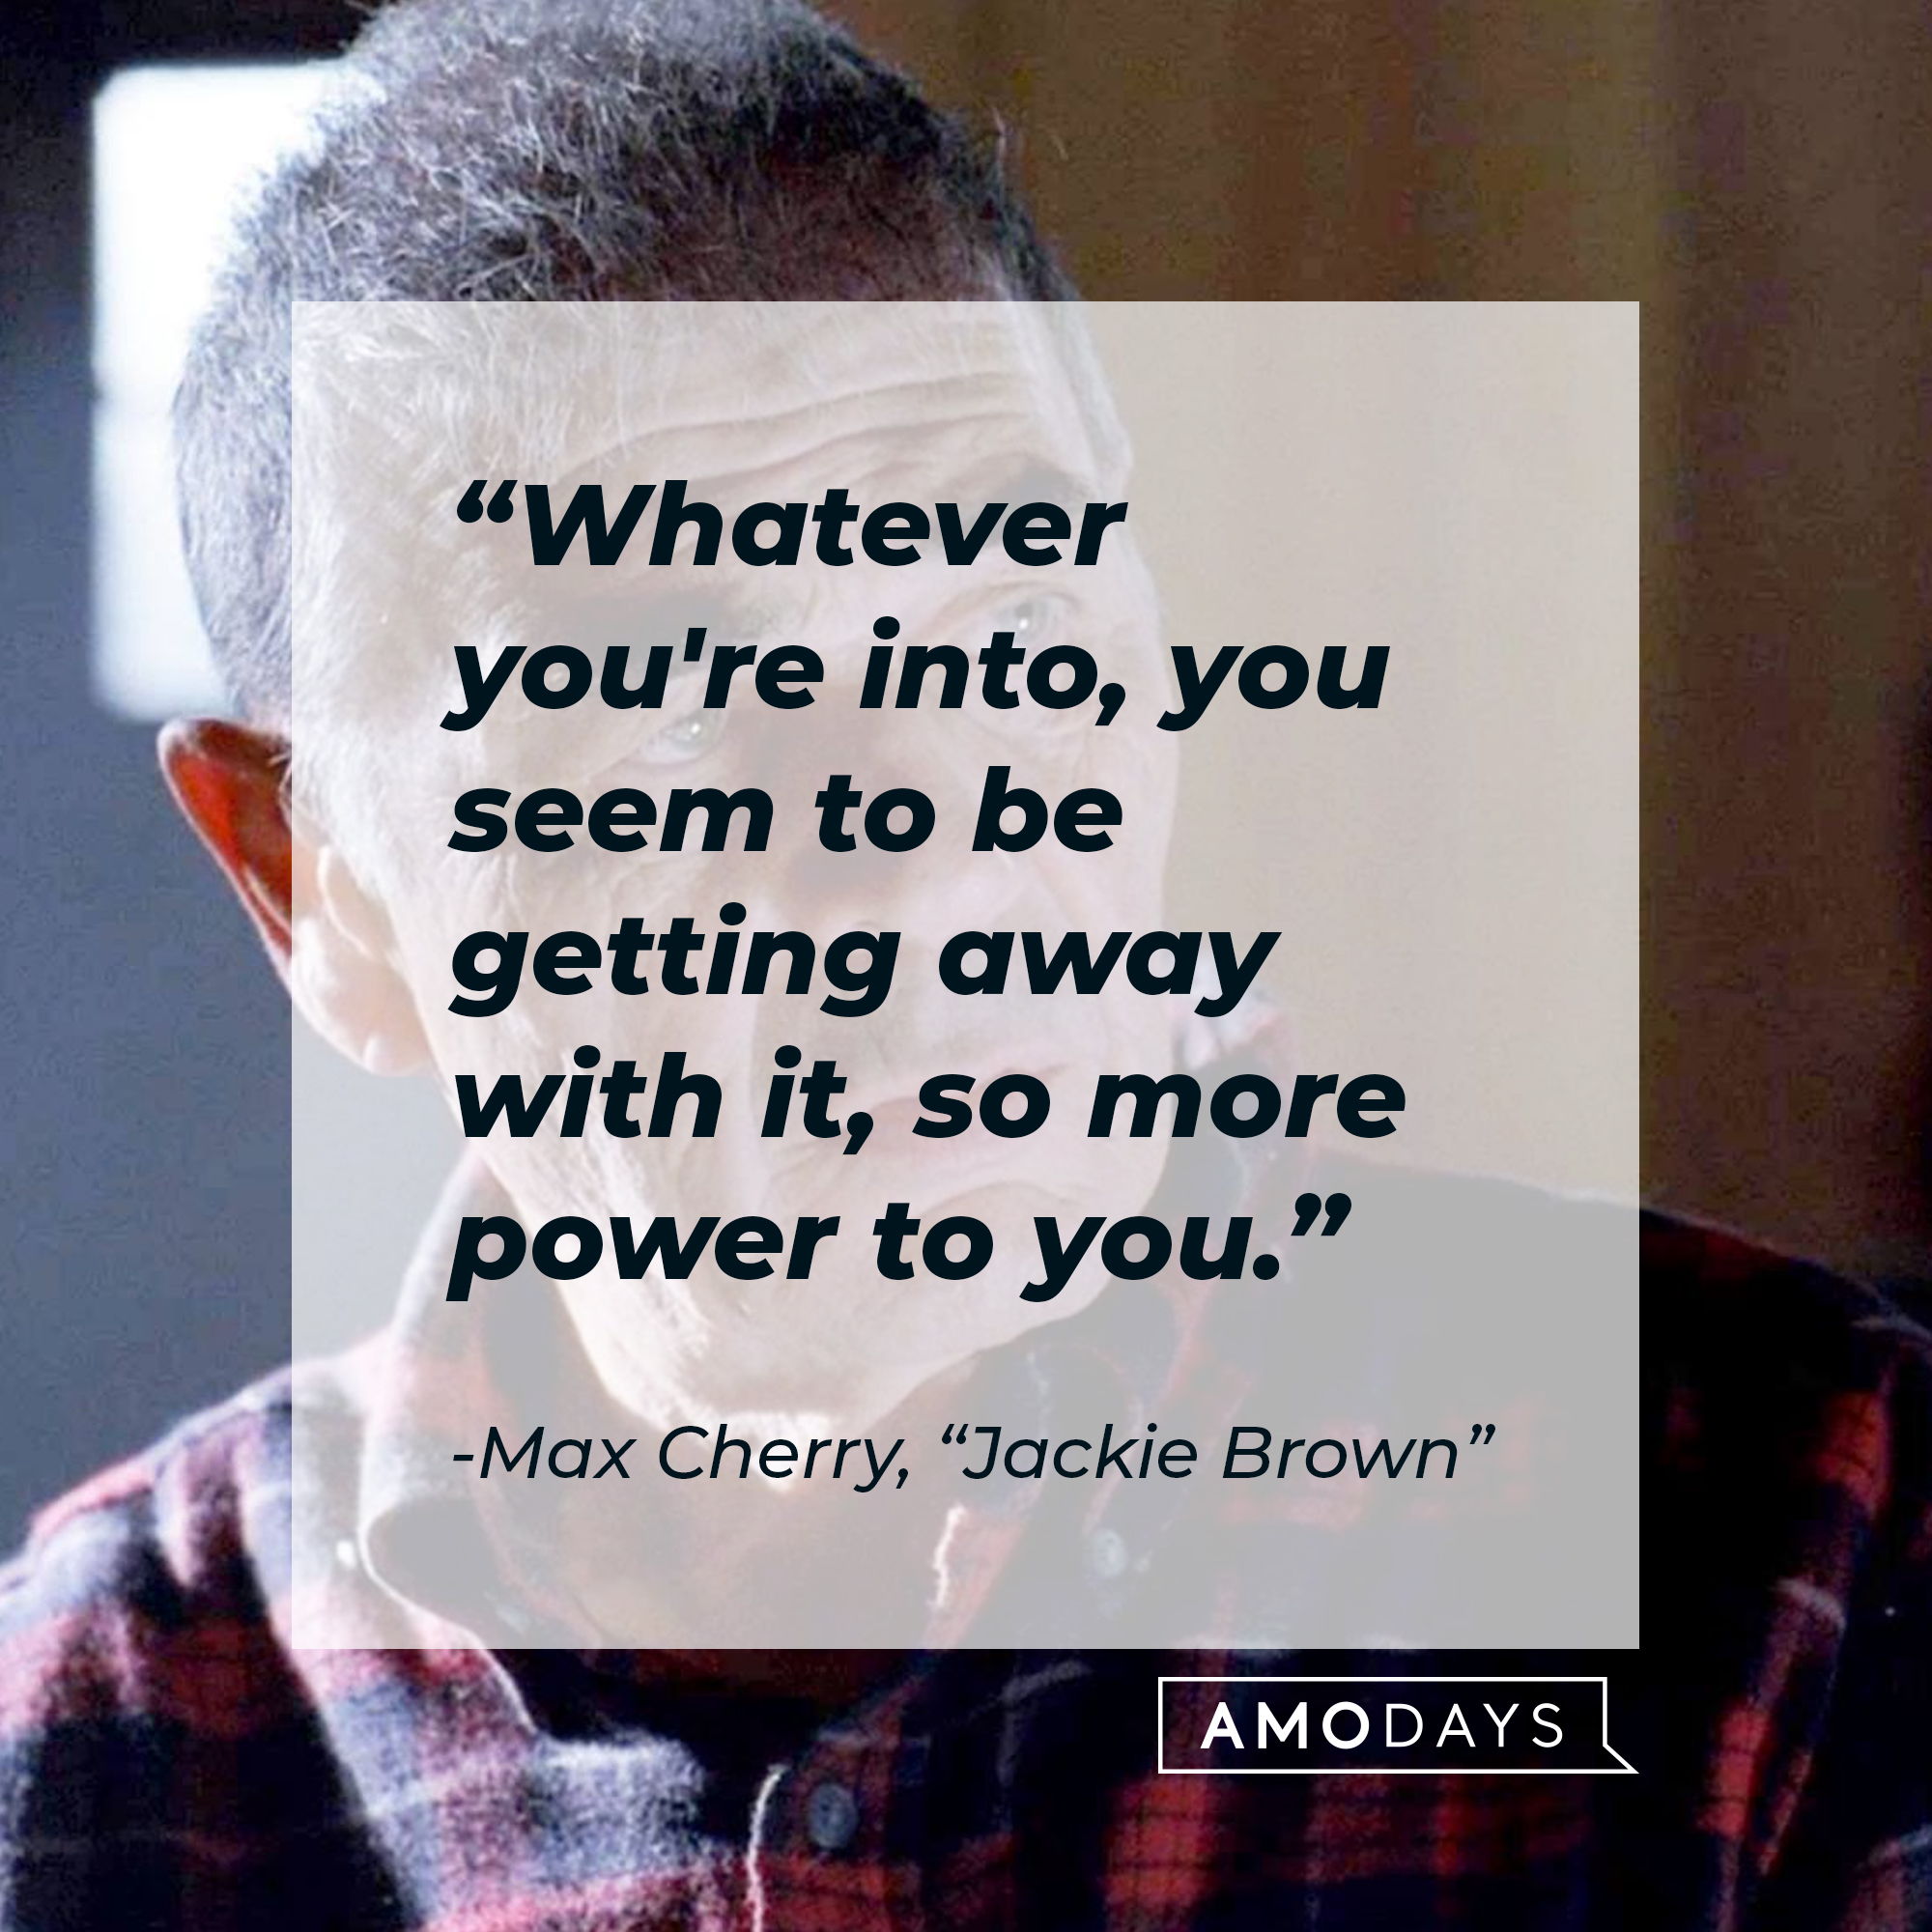 Max Cherry's quote: "Whatever you're into, you seem to be getting away with it, so more power to you." | Source: Facebook/JackieBrownMovie